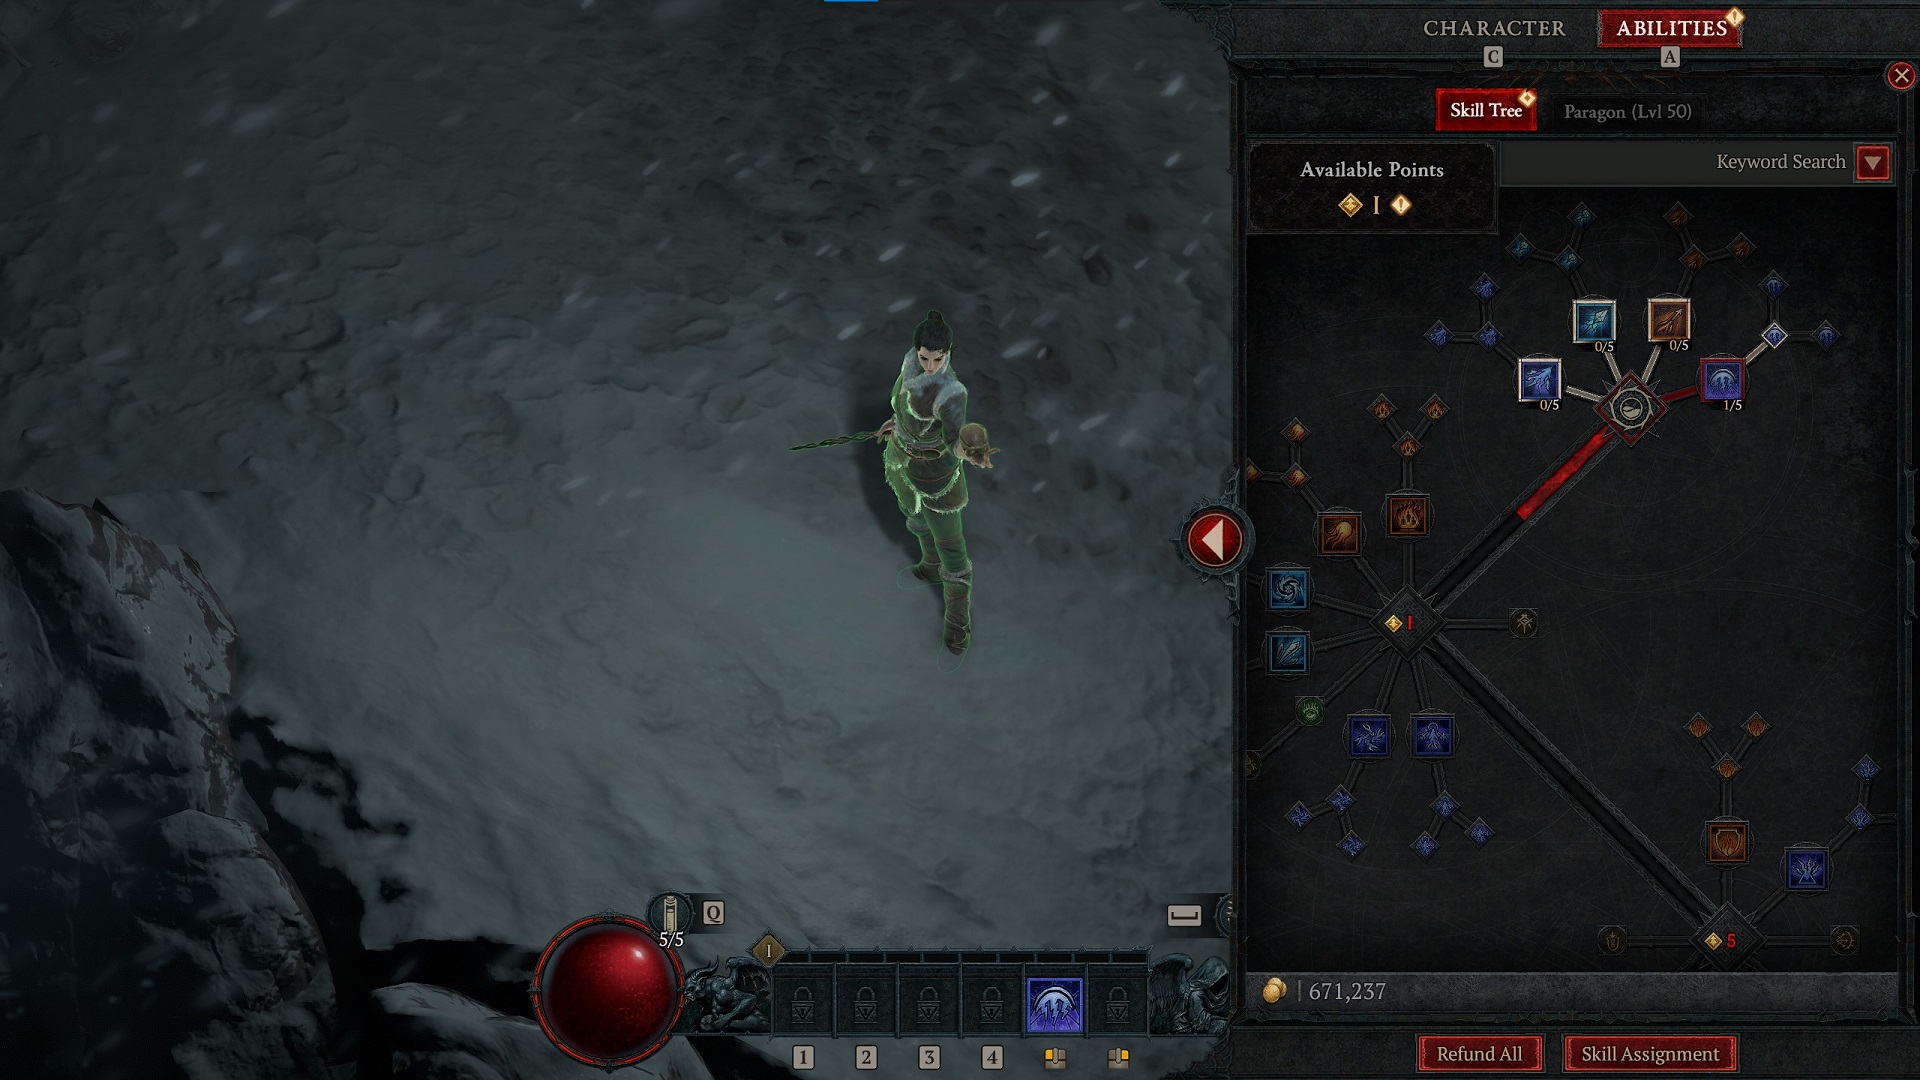 An image of the Sorcerer's skill tree in Diablo 4.